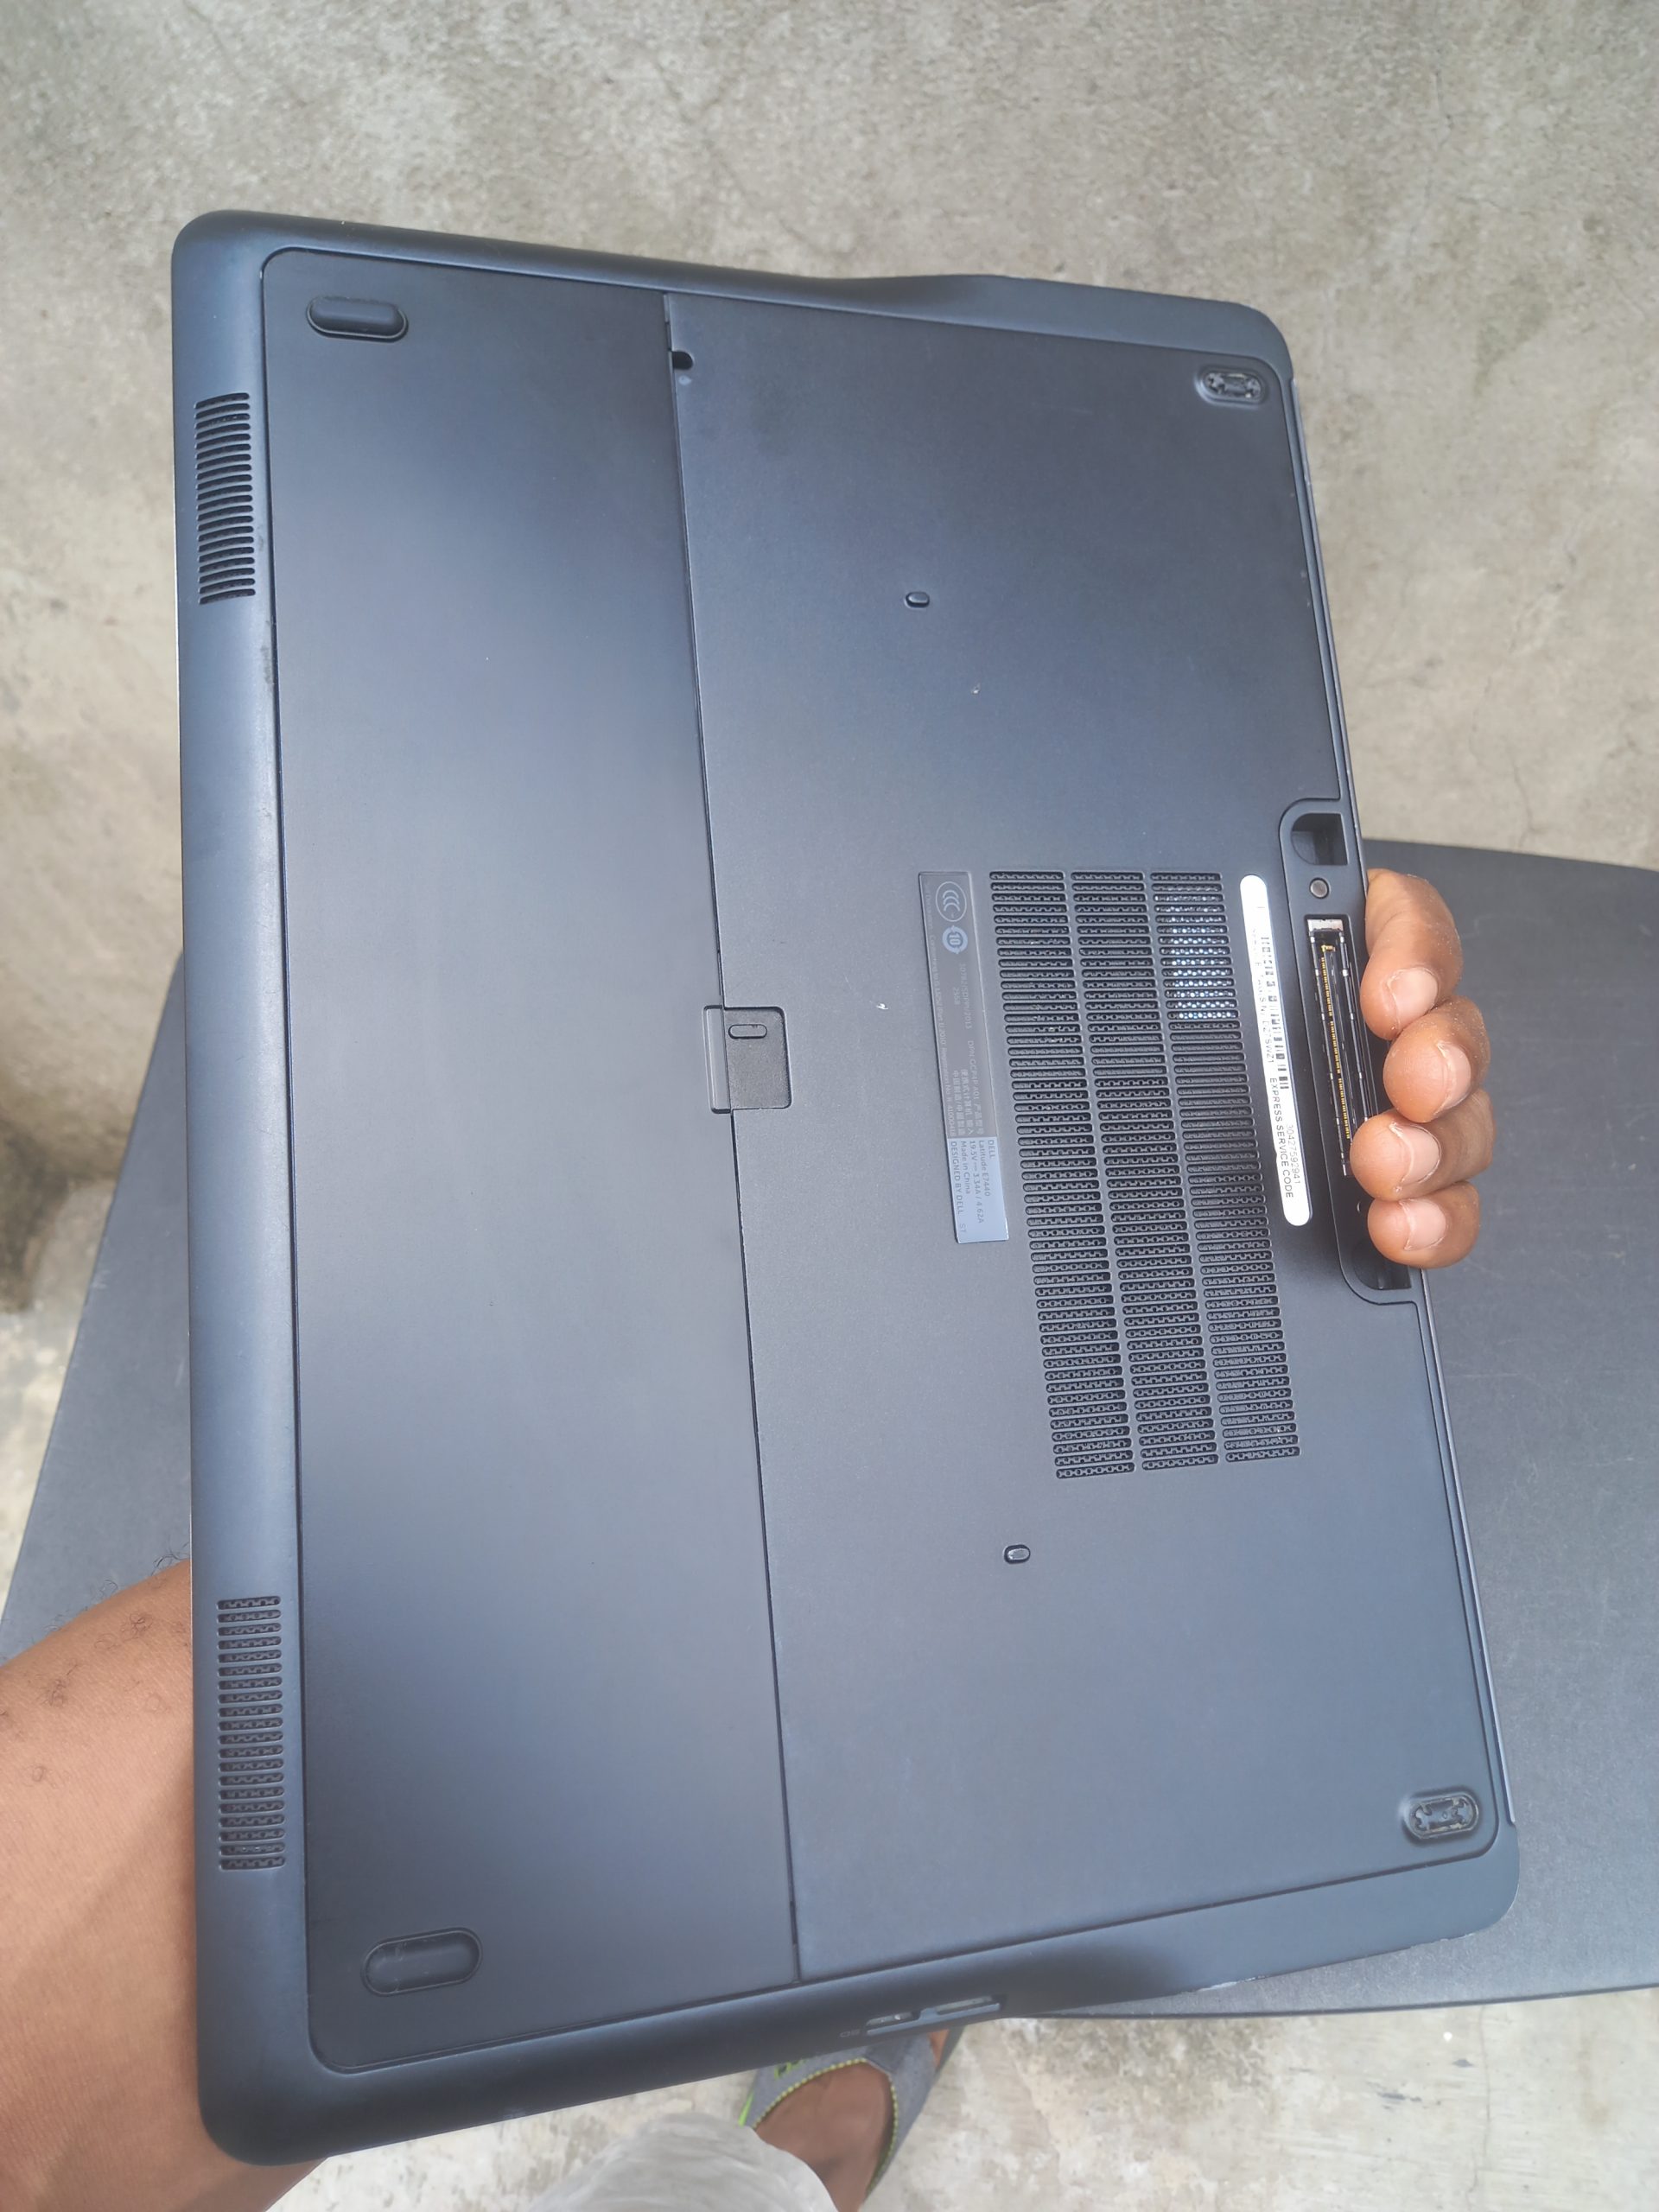 uk used laptop, london used laptop , Original laptop , computer shop in lagos , laptop for sale in lagos , computer stores in lagos nigeria , wholesale computer shop in lagos nigeria , laptop supply shops/store in lagos , Hp laptop for sale , dell laptops for sale , buy laptops online, lenovo laptop for sale , shopeinverse store in lagos , hp envy x360 convertible, hp envy laptop for sale, shopinverse computer , shopinverse laptops , note books computers , Dell latitude 7440 for sale, Dell latitude 7440 core i5 500gb hdd 4g ram camera good battery life , very portable and lightweight and very durable direct uk used american standard. second hand laptop, cheap laptop for sale in lagos , laptop charger for sale in lagos, original wholes sale laptop charger for sale in lagos computer village nigeria laptop repair shop in lagos, gbn mobile computers , gbn mobile laptops /computers store, computer village lagos ikeja shops , laptops for sale in computer village , cheap laptops in computer village , laptop warehouse in lagos nigeria, computer warehouse in ikeja computer , buy/swap laptops in ikeja computer village , laptop pay on delivery in lagos ikeja , laptops with good Guarantee /warranty shop in lagos